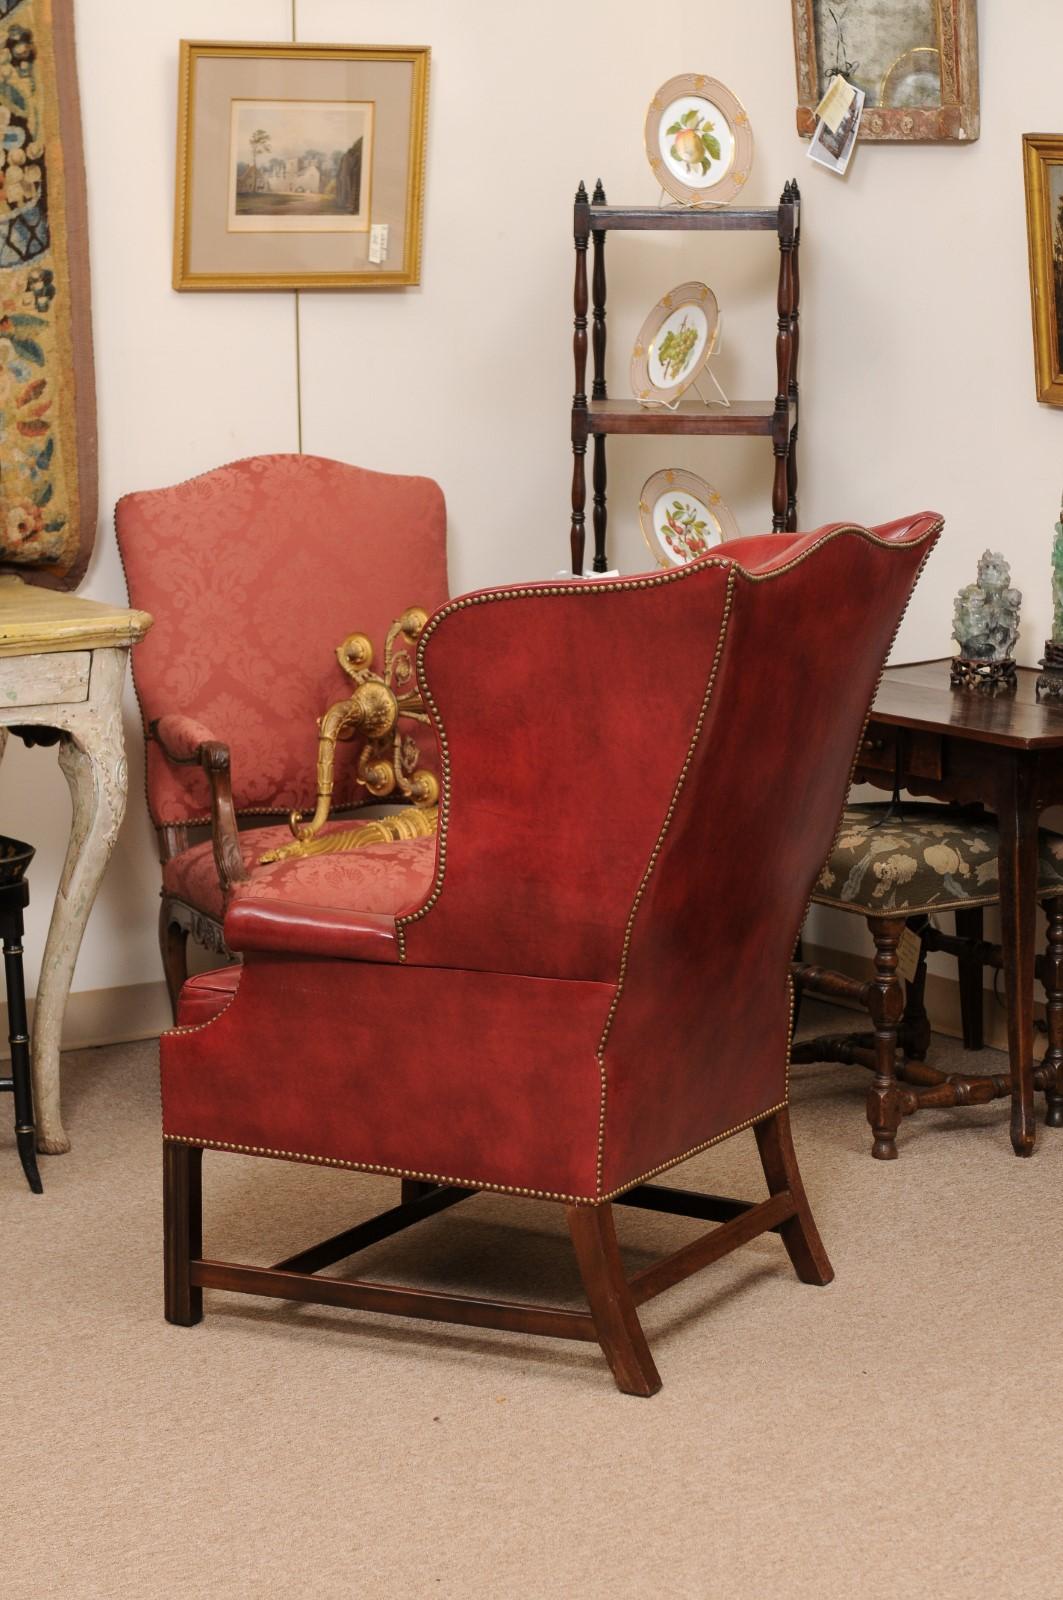 20th Century English Wing Chair in Mahogany & Red Leather Upholstery with Brass  In Good Condition For Sale In Atlanta, GA